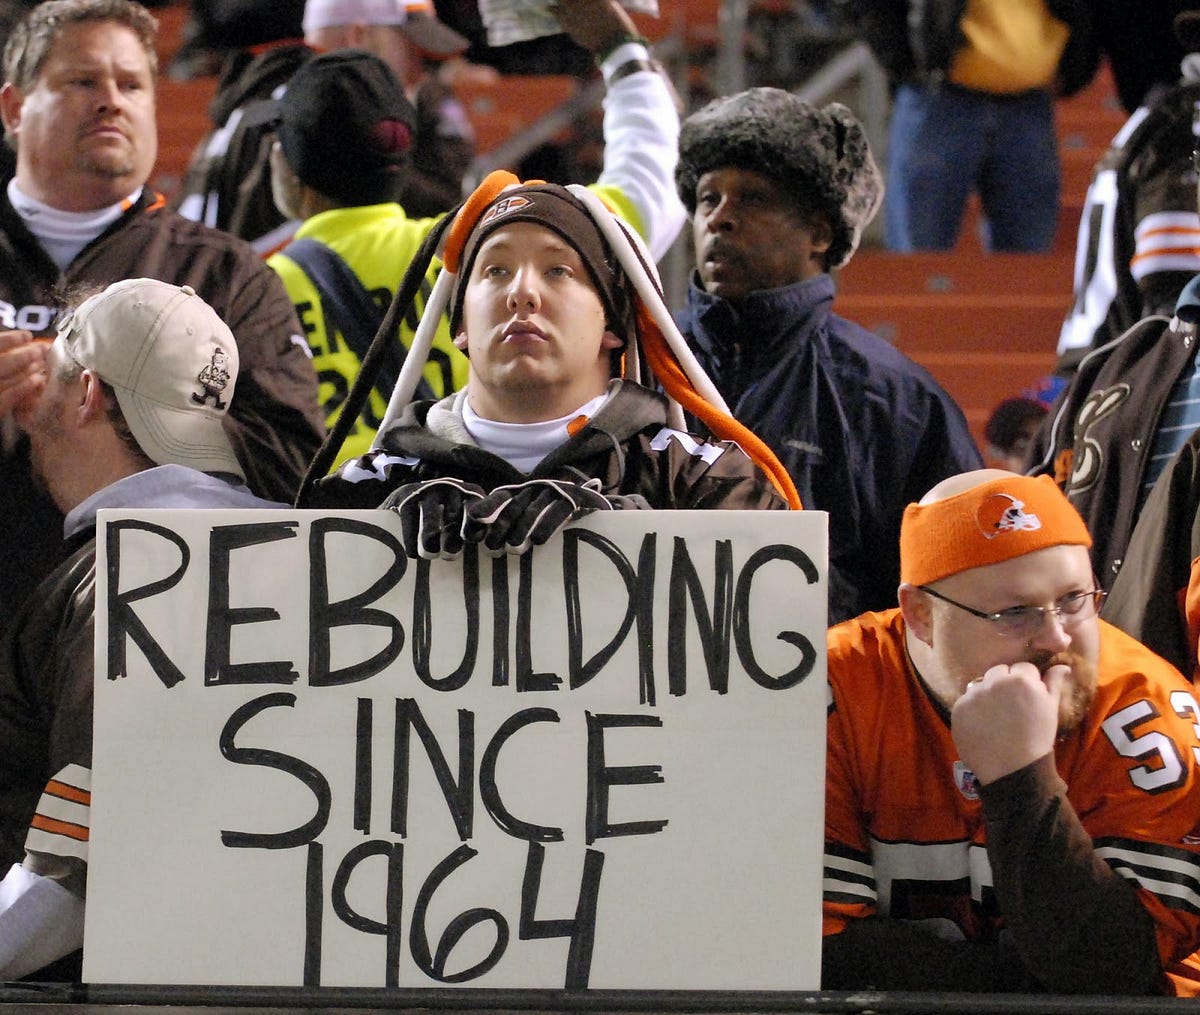 Unfortunately, I have been a Cleveland Browns fan my whole life. 